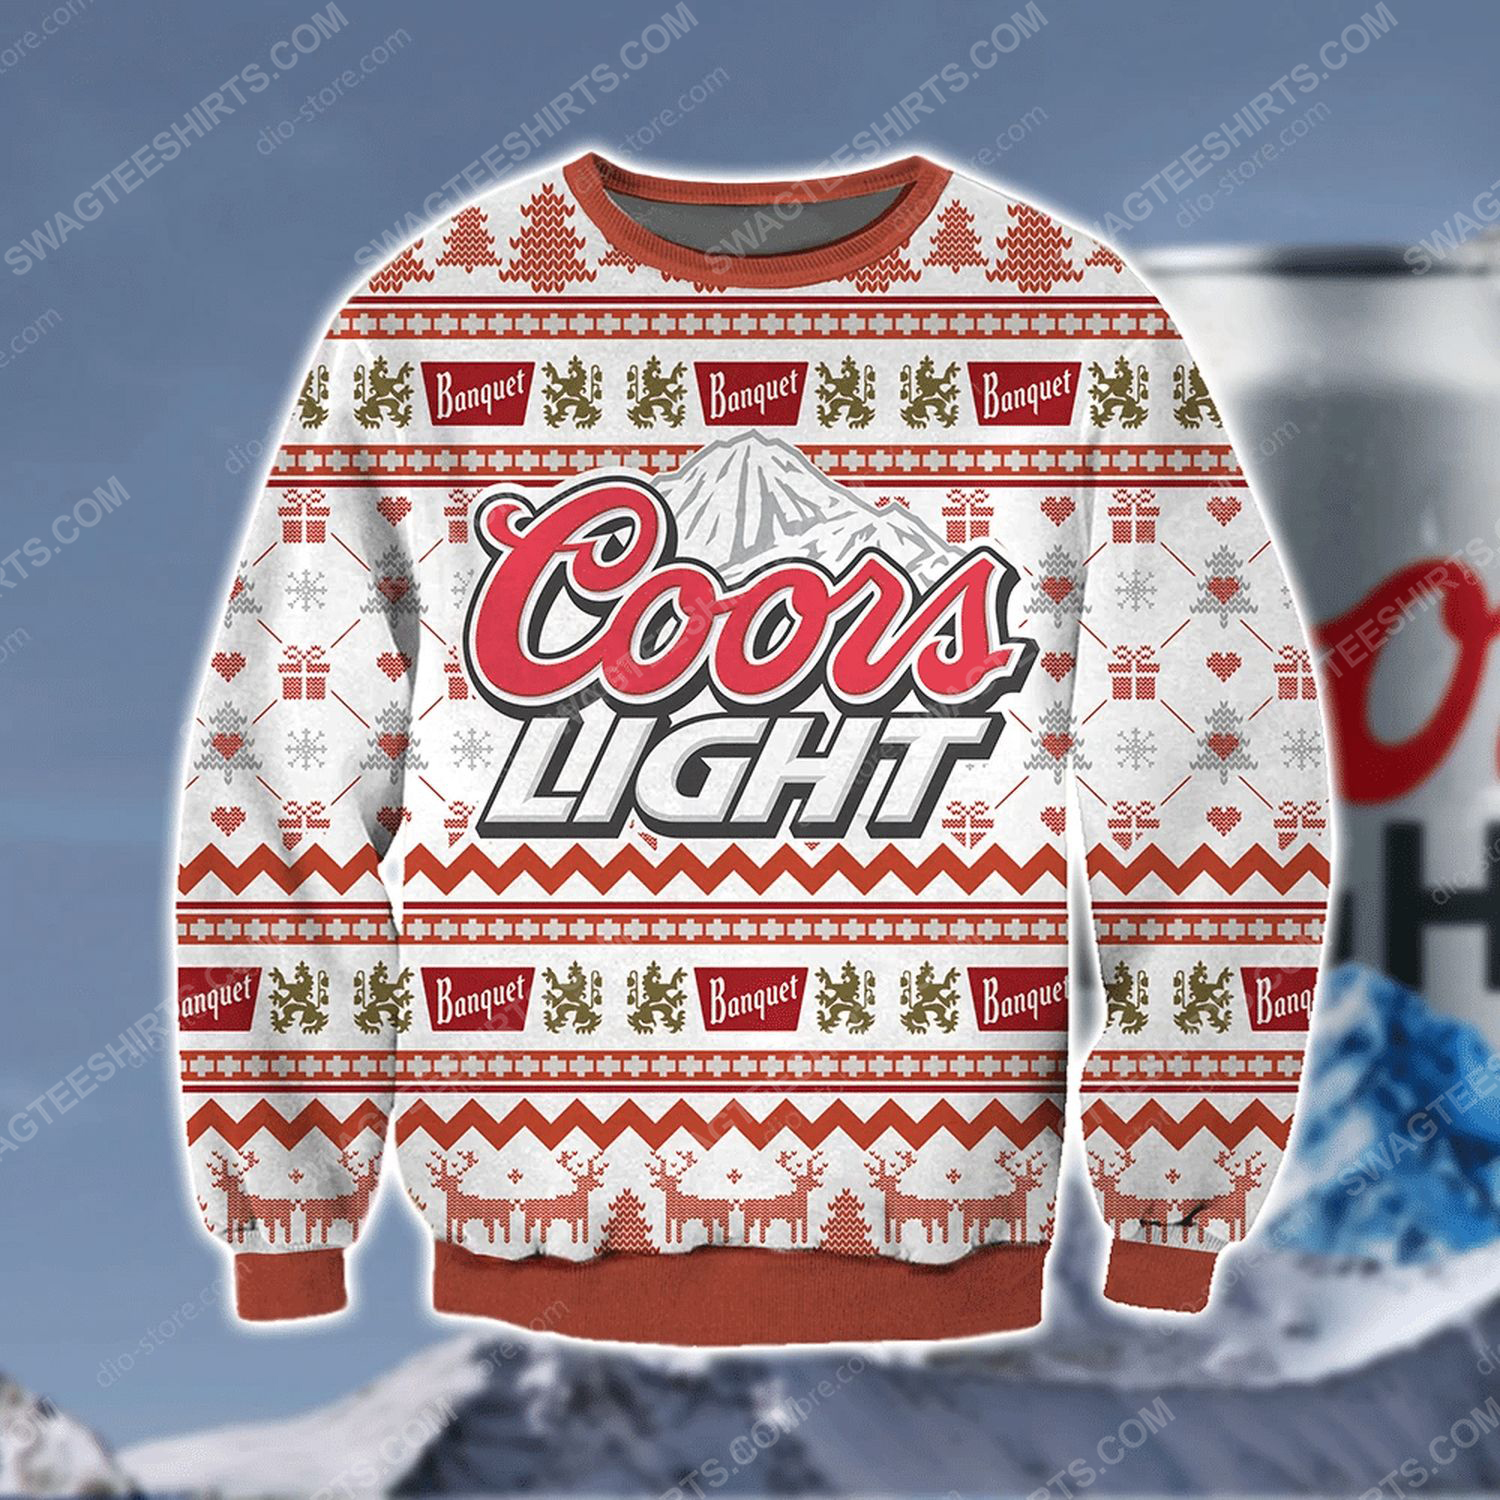 Coors light banquet beer ugly christmas sweater